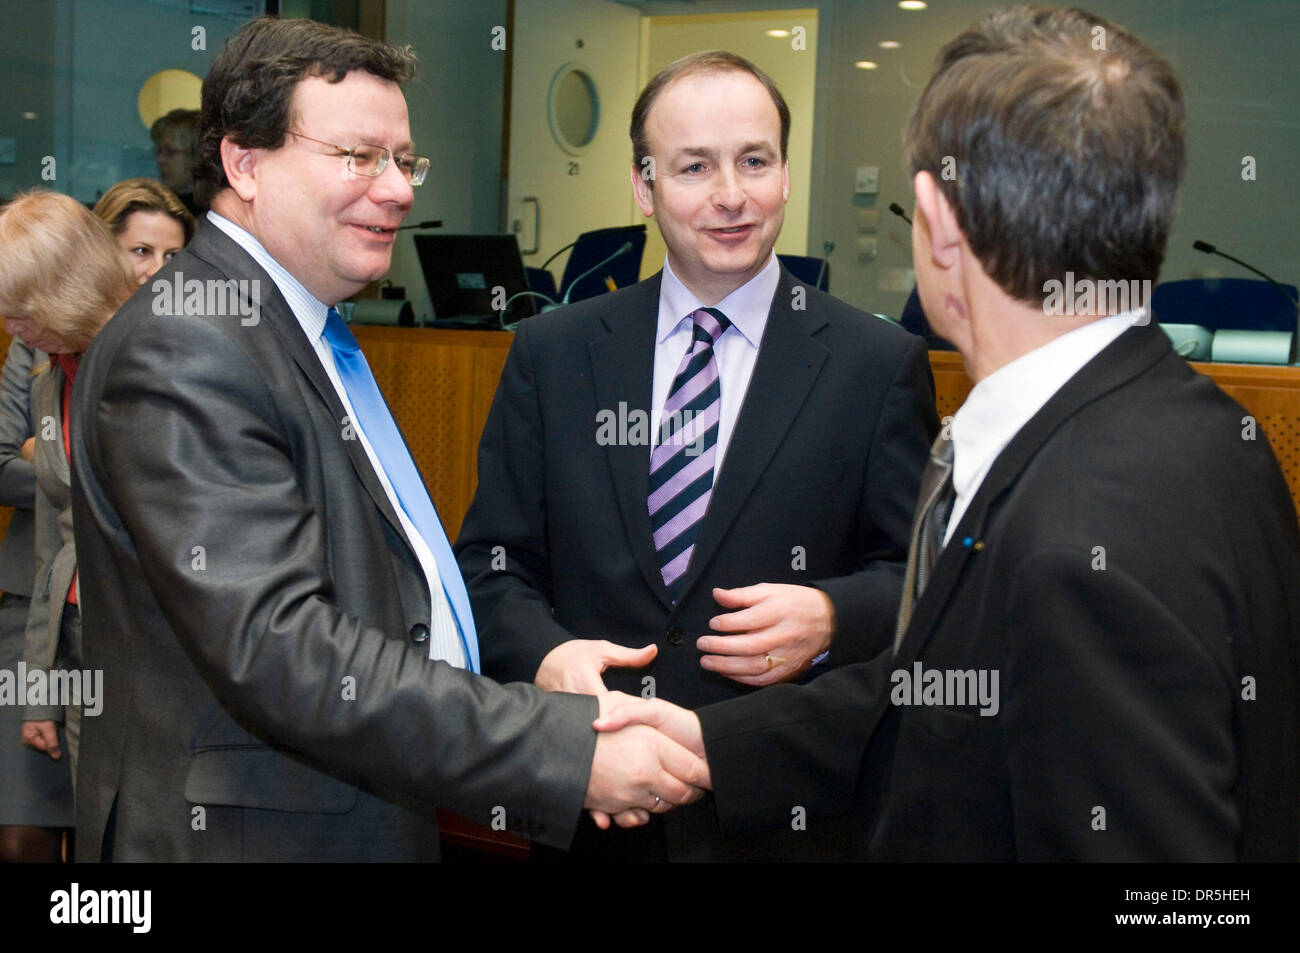 Dec 08, 2008 - Brussels, Belgium - Irish Foreign Minister MICHAEL MARTIN (C), Czech Deputy Prime Minister ALEXANDR VONDRA (L) and  French European Affairs State Secretary JEAN-PIERRE JOUYET pictured prior to a General Affairs and External Relations Council (GAERC) at European Council headquarters  in  Brussels, Belgium on 2008-12-08 . EU foreign ministers gathered to preper Europea Stock Photo